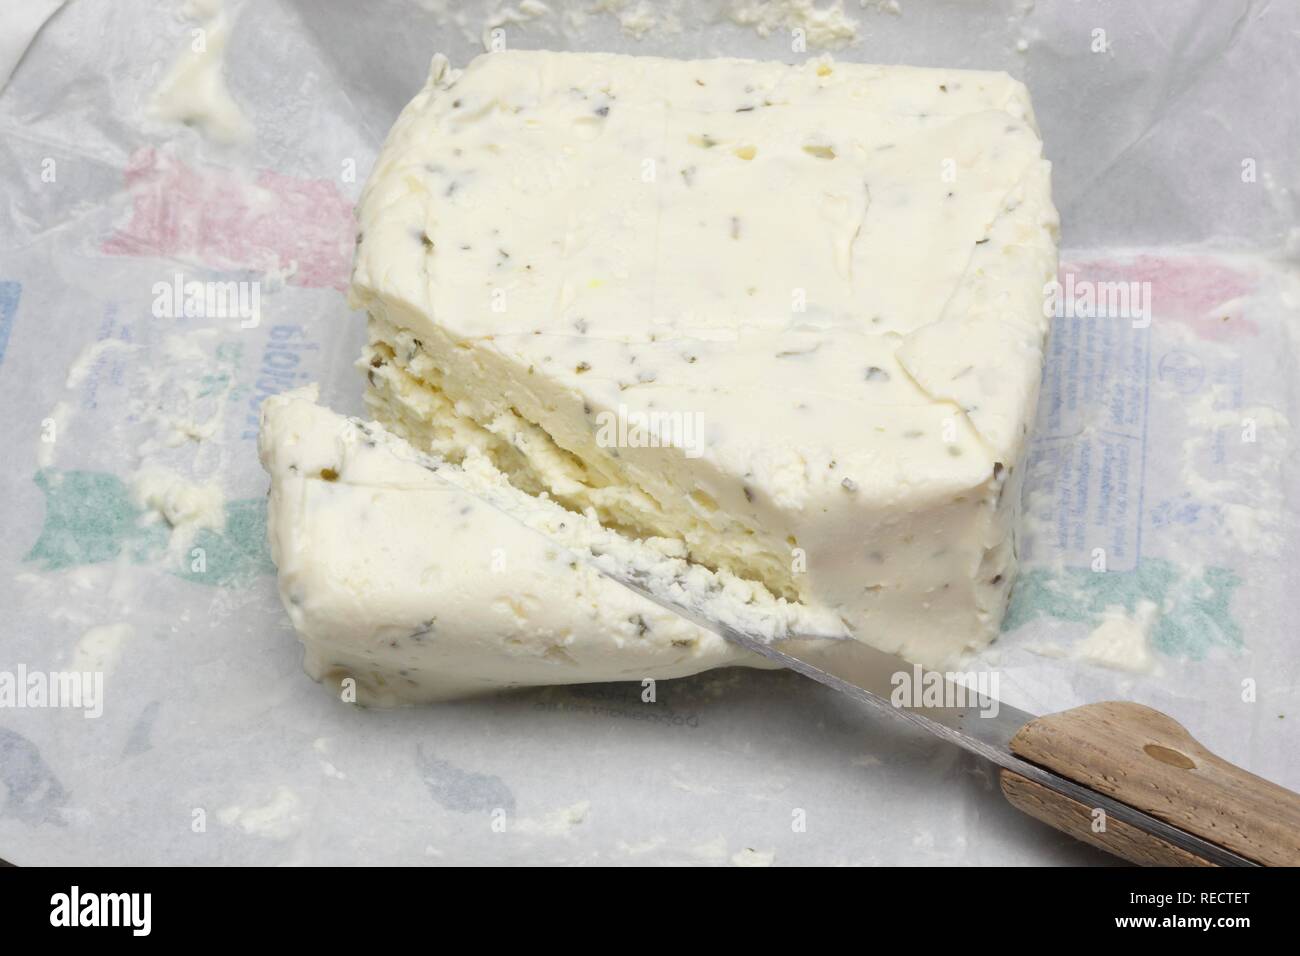 Robiola, Robiola osella, Italian cheese from the regions of Piedmont and Lombardy Stock Photo